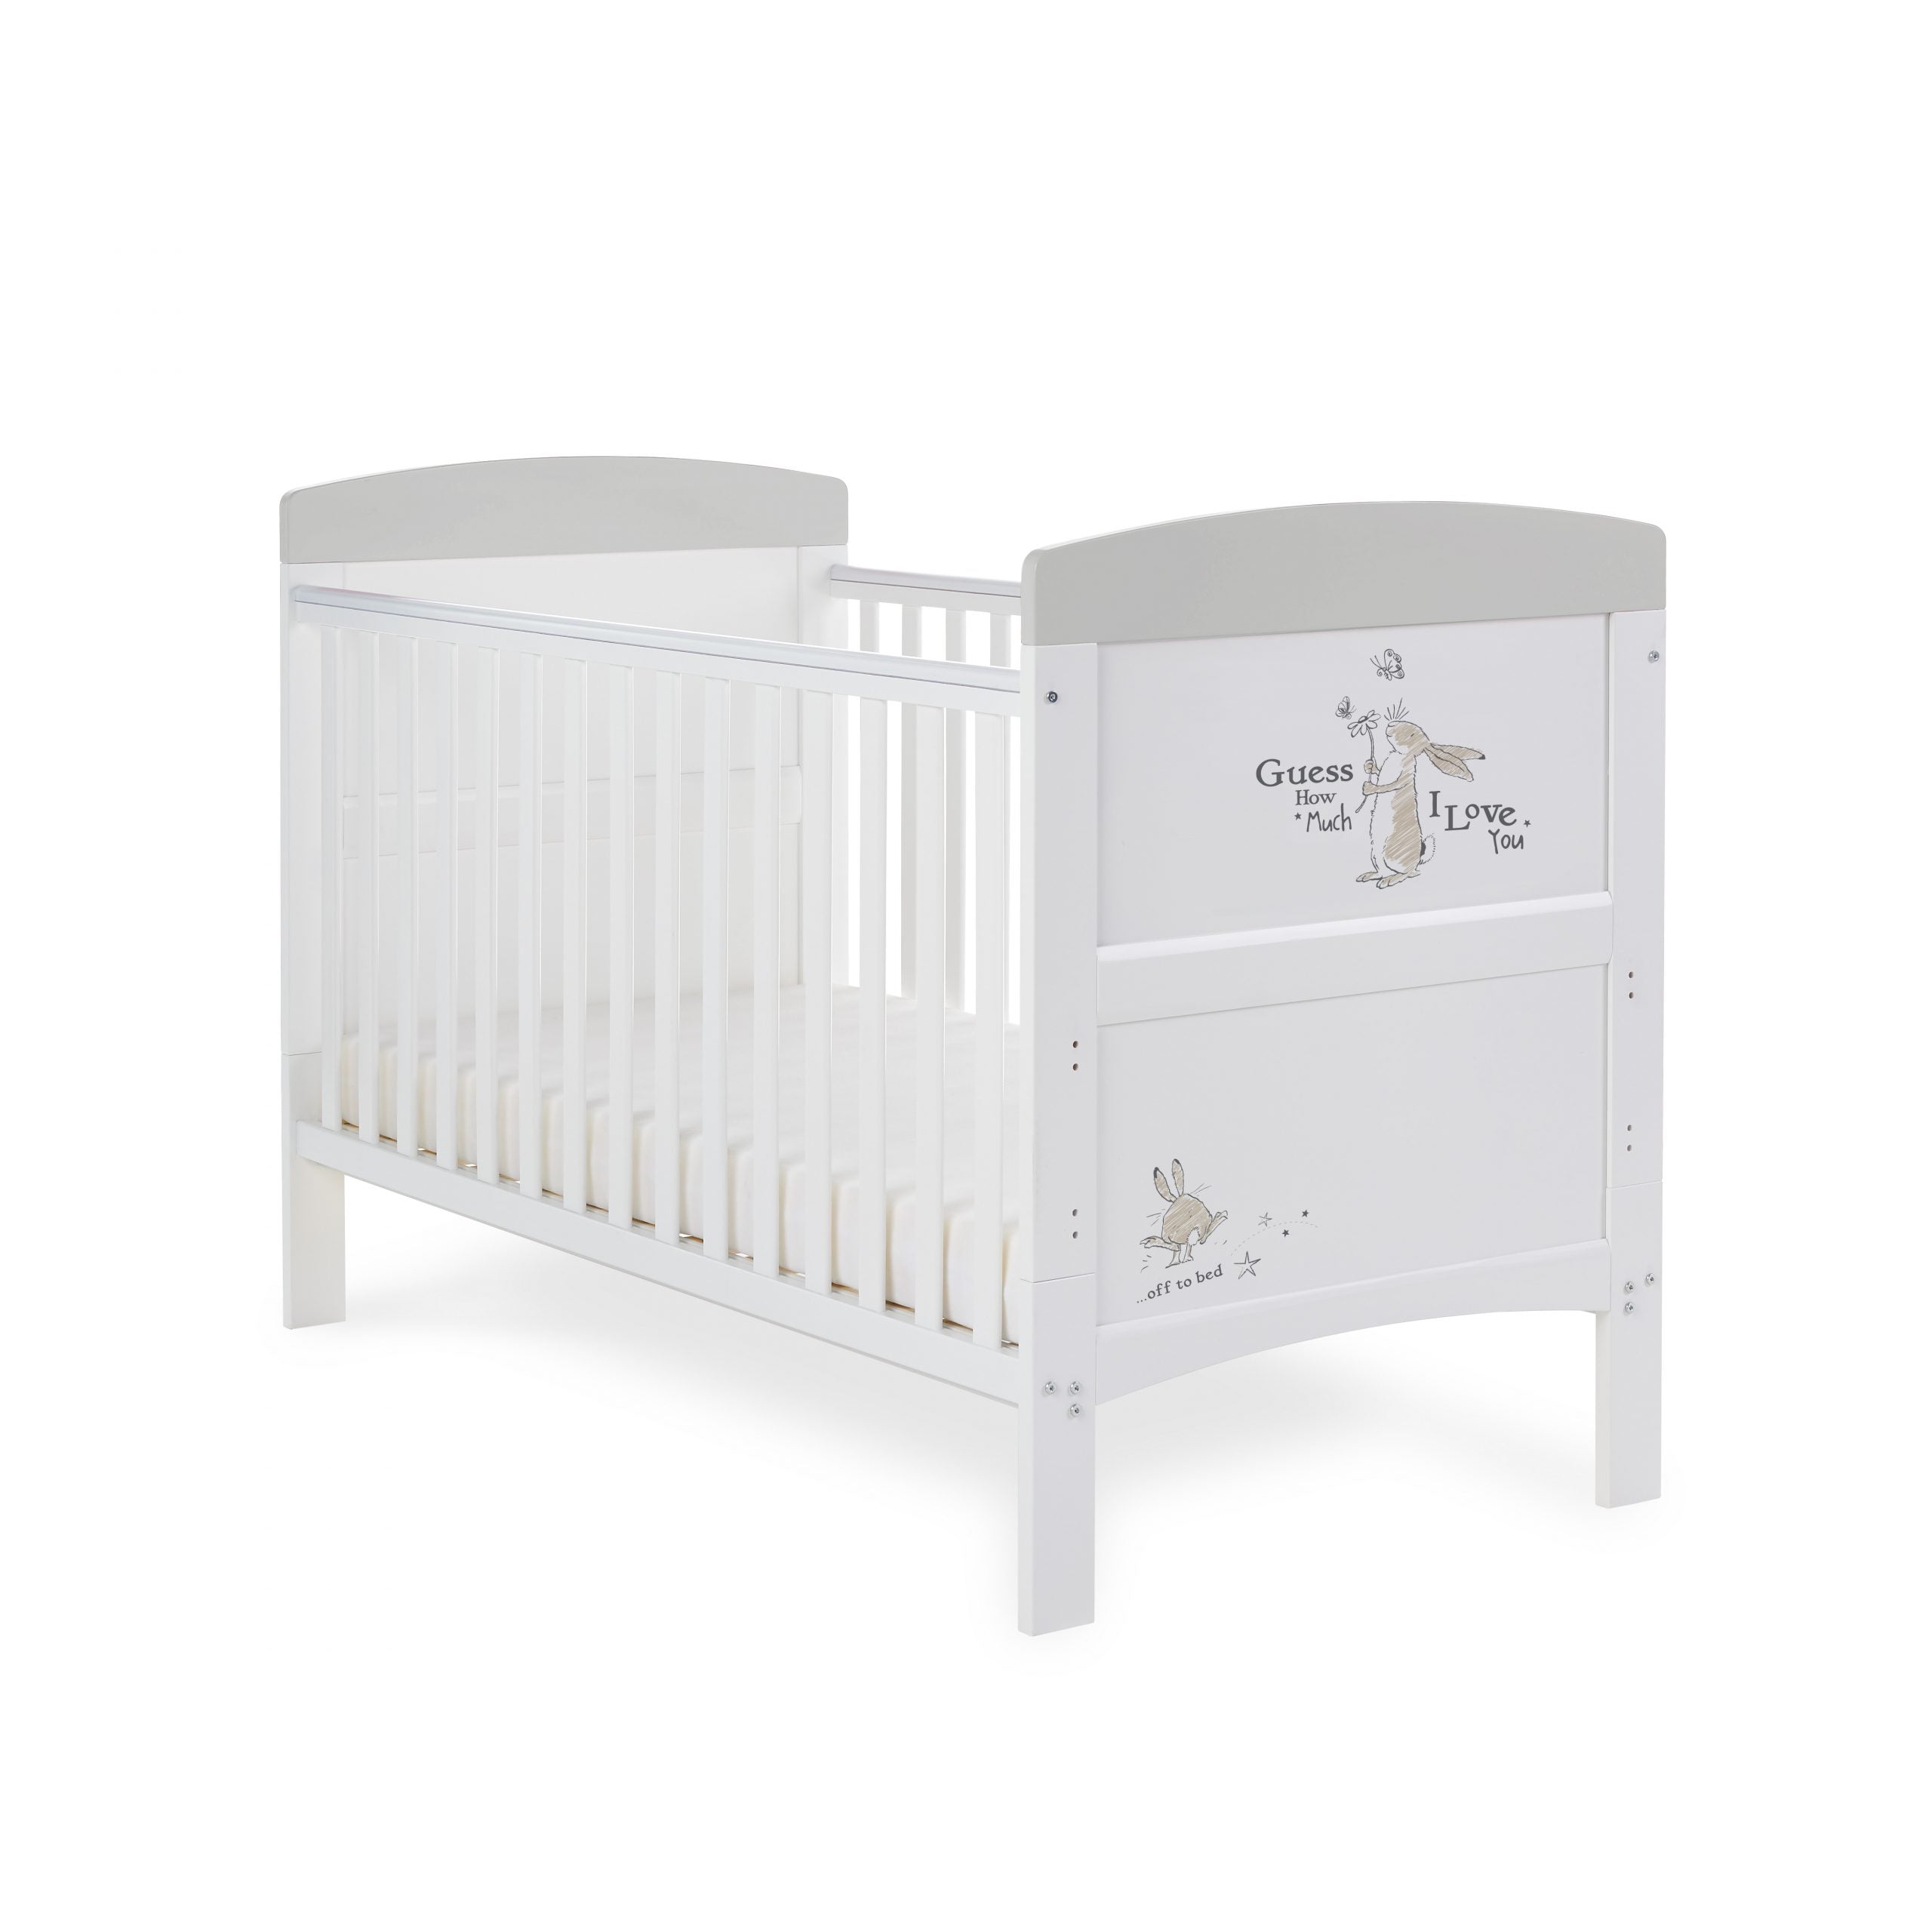 Obaby Grace Inspire Cot Bed – Guess How Much I Love You – Scribble -  | For Your Little One